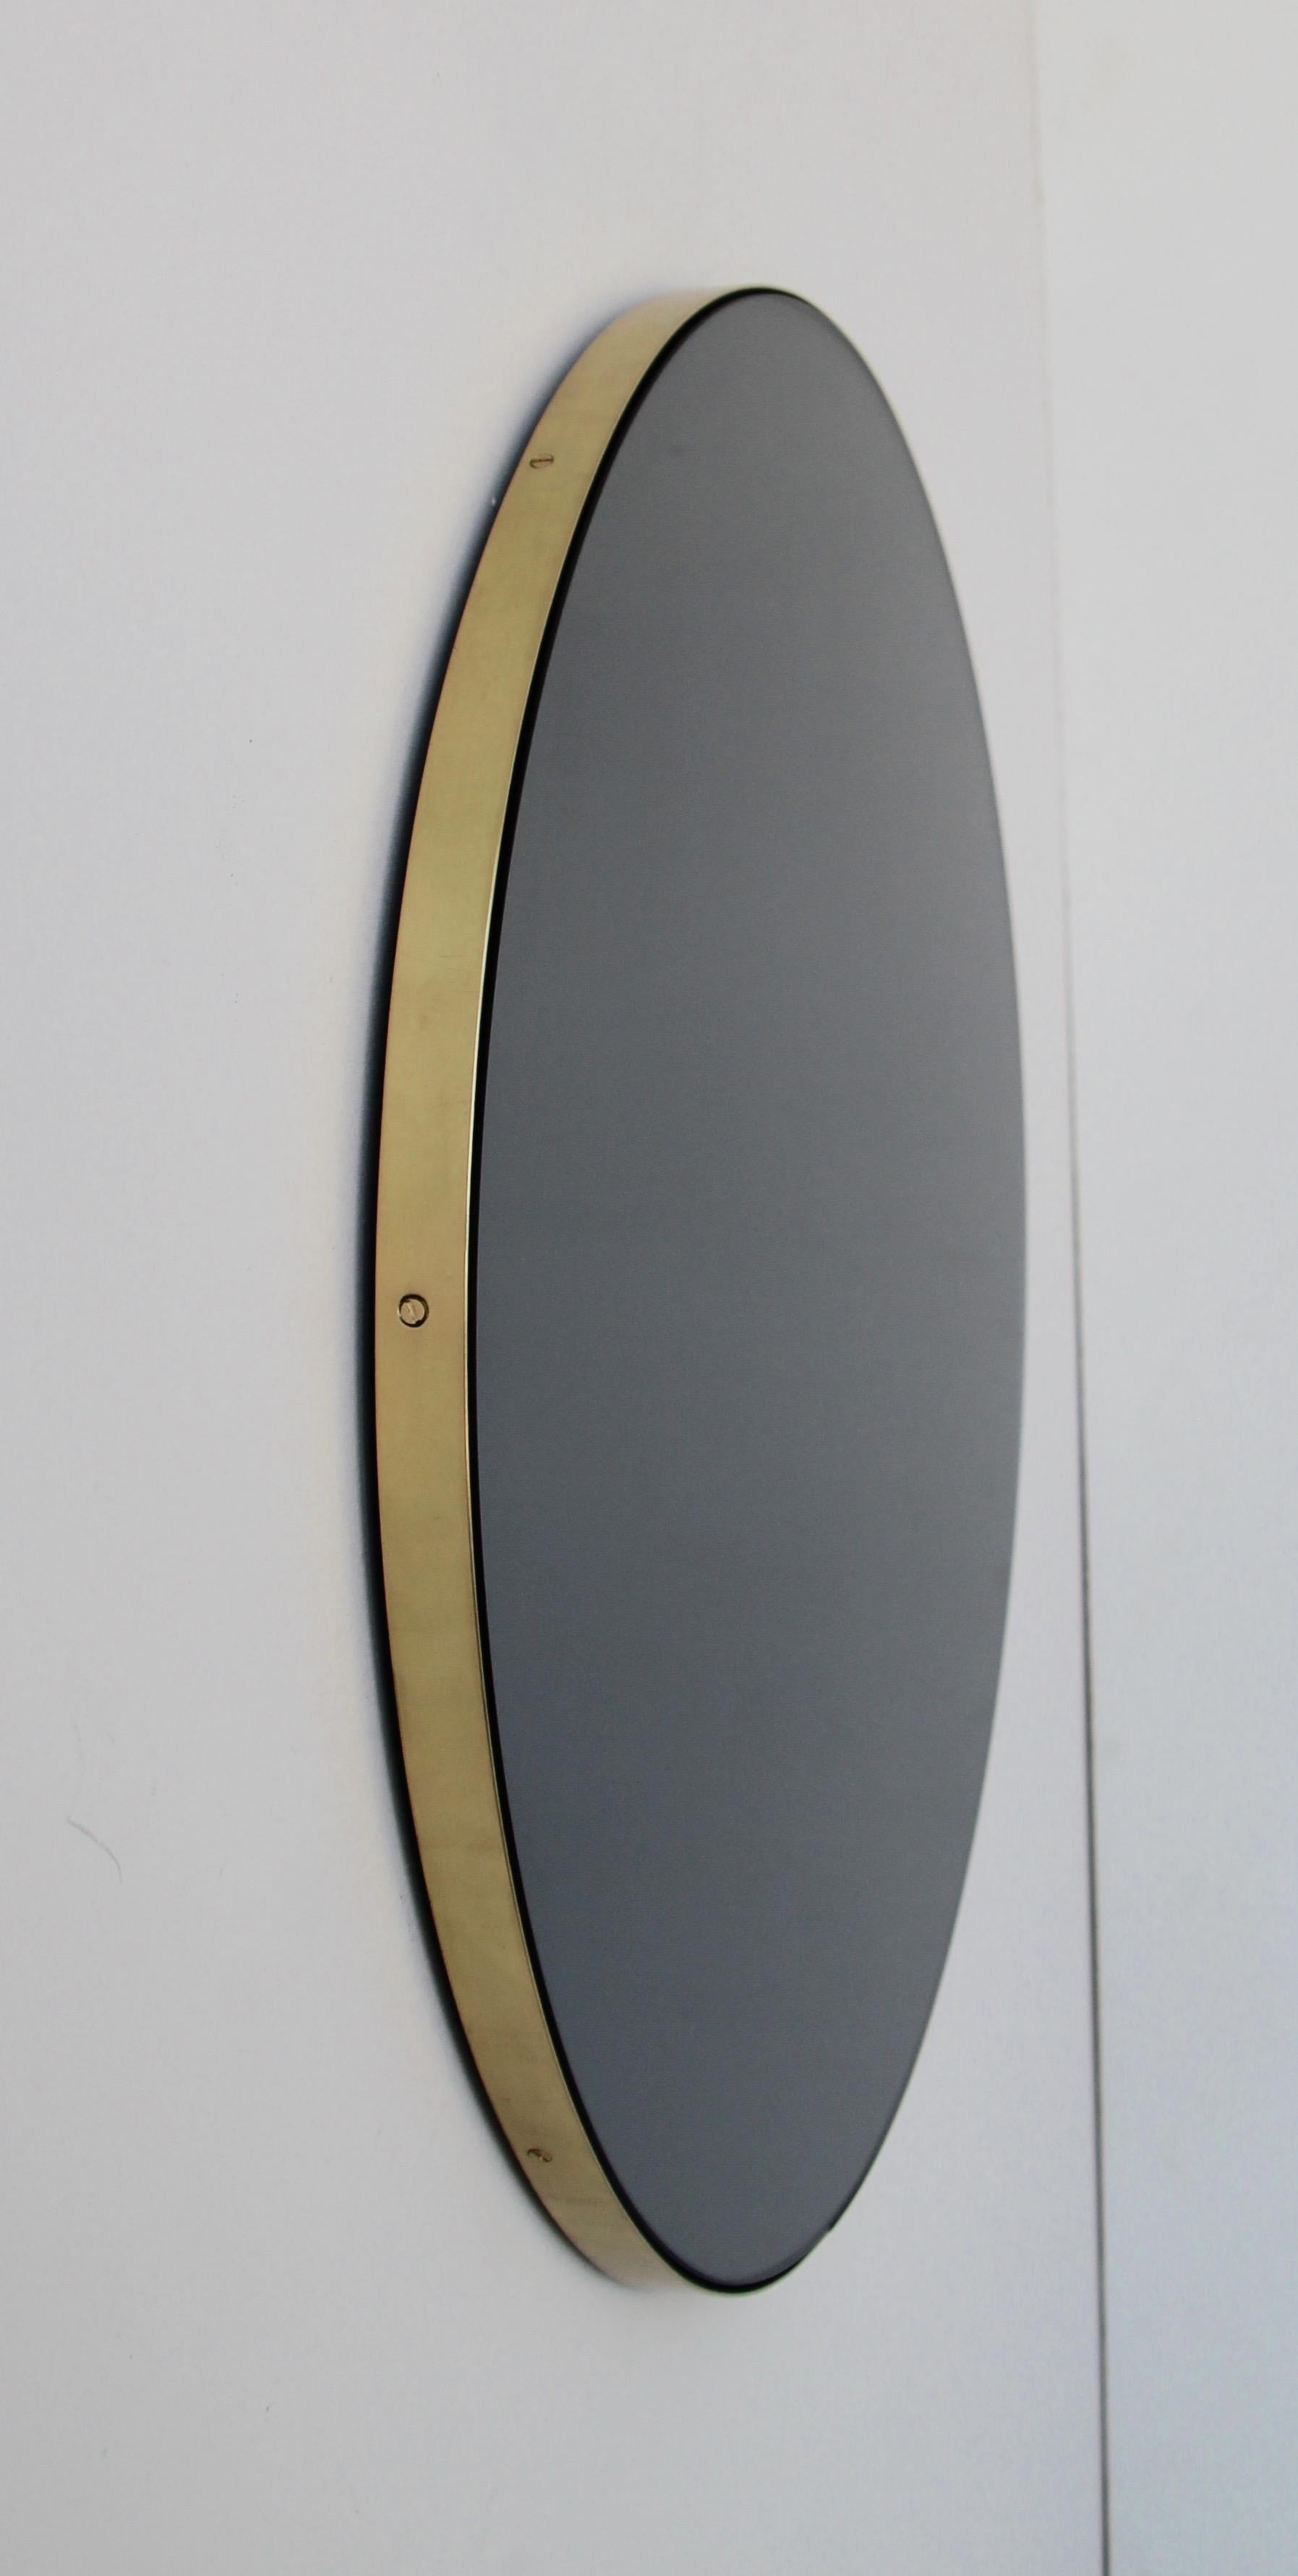 Orbis Black Tinted Round Contemporary Mirror with a Brass Frame, Small In New Condition For Sale In London, GB